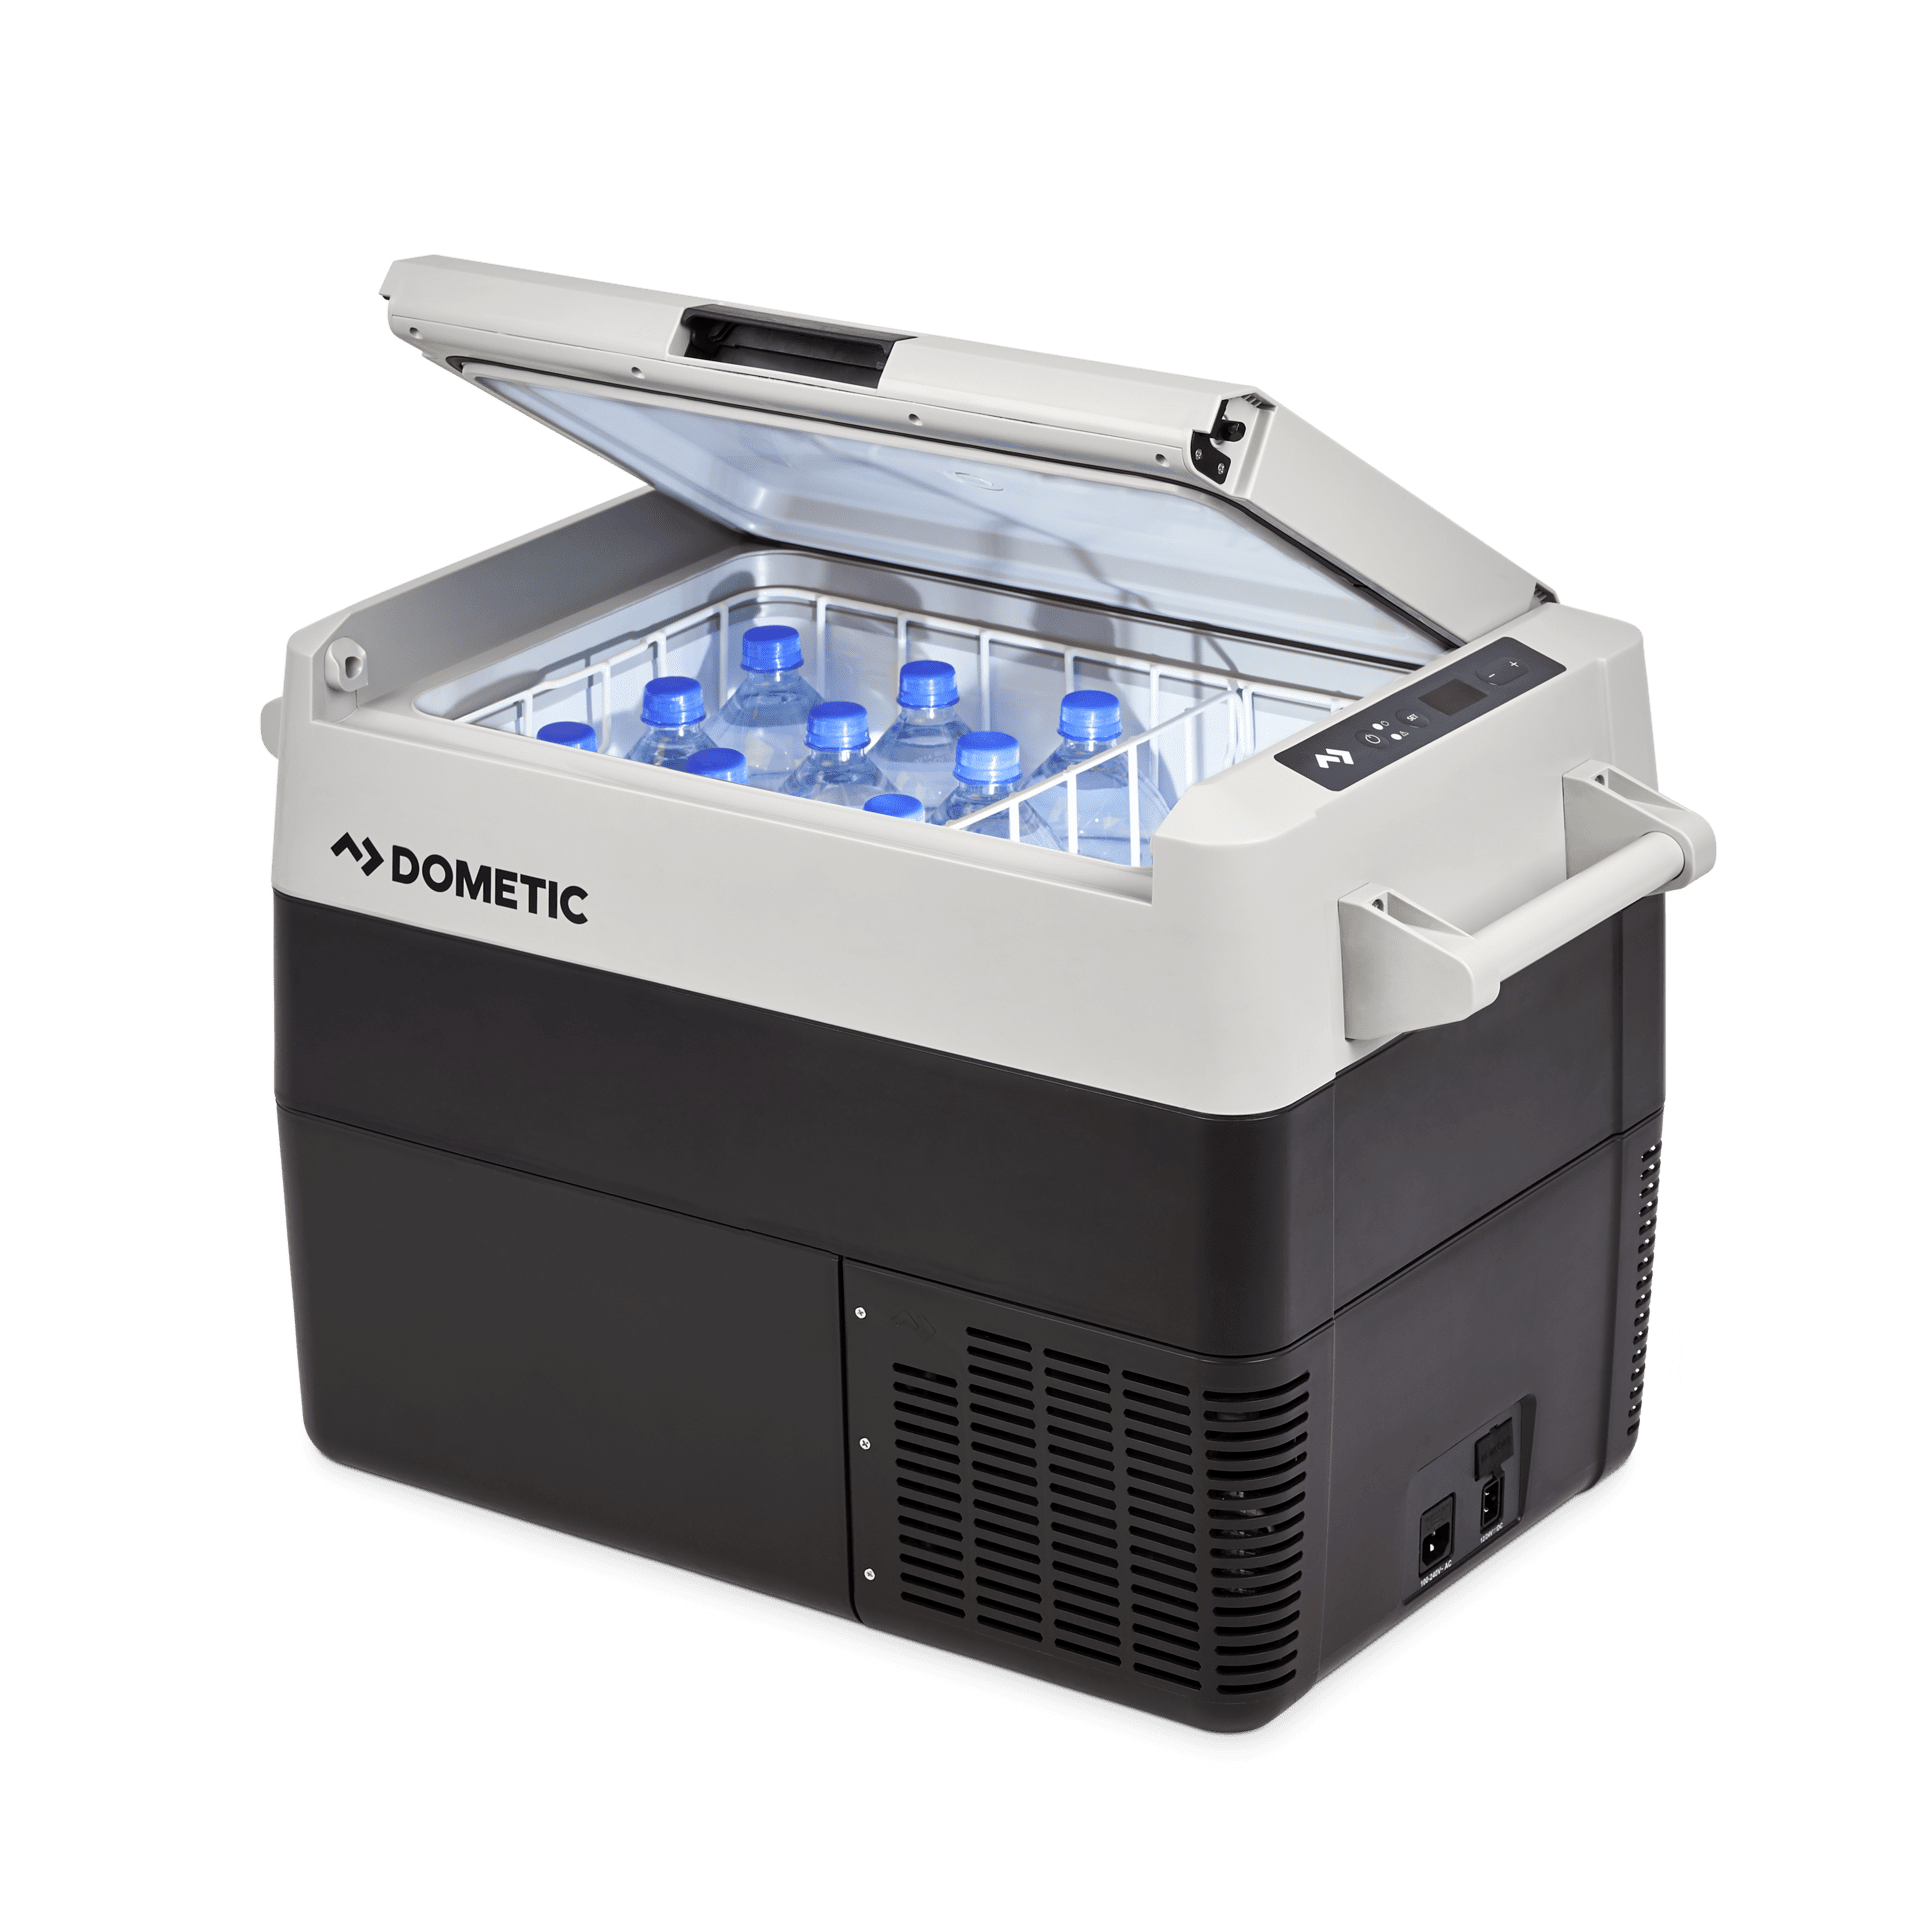 Flatter Savvy Therapy ᐅ Camping Coolers & Ice Chests for Car and Outdoor | Dometic.com